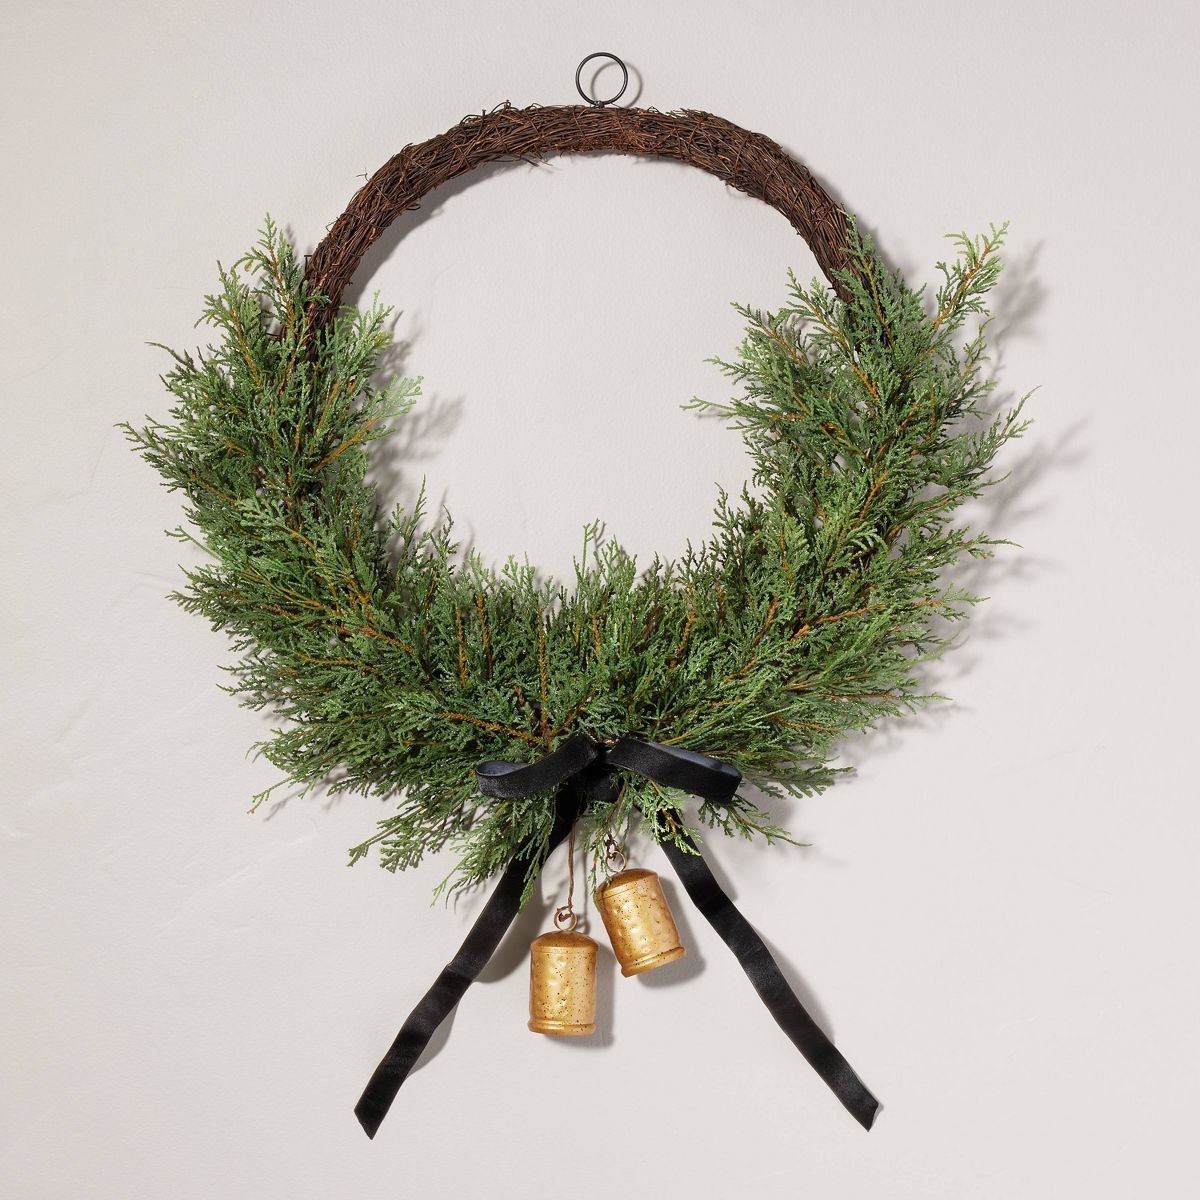 26" Faux Cedar Hoop Christmas Wreath with Bell Ornaments - Hearth & Hand™ with Magnolia | Target